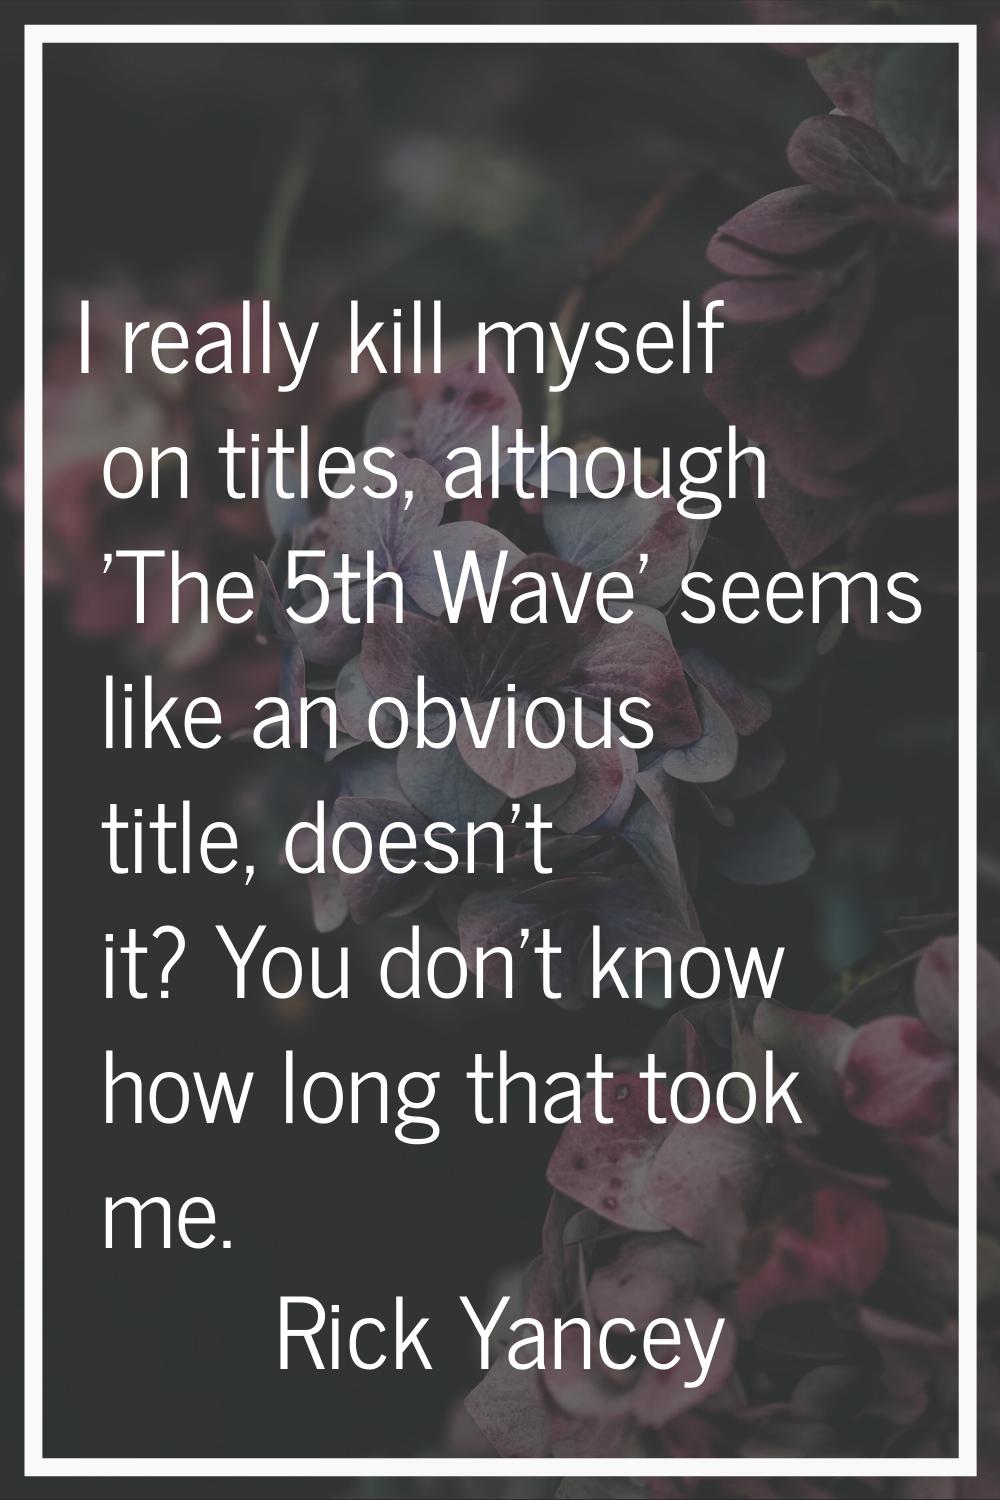 I really kill myself on titles, although 'The 5th Wave' seems like an obvious title, doesn't it? Yo